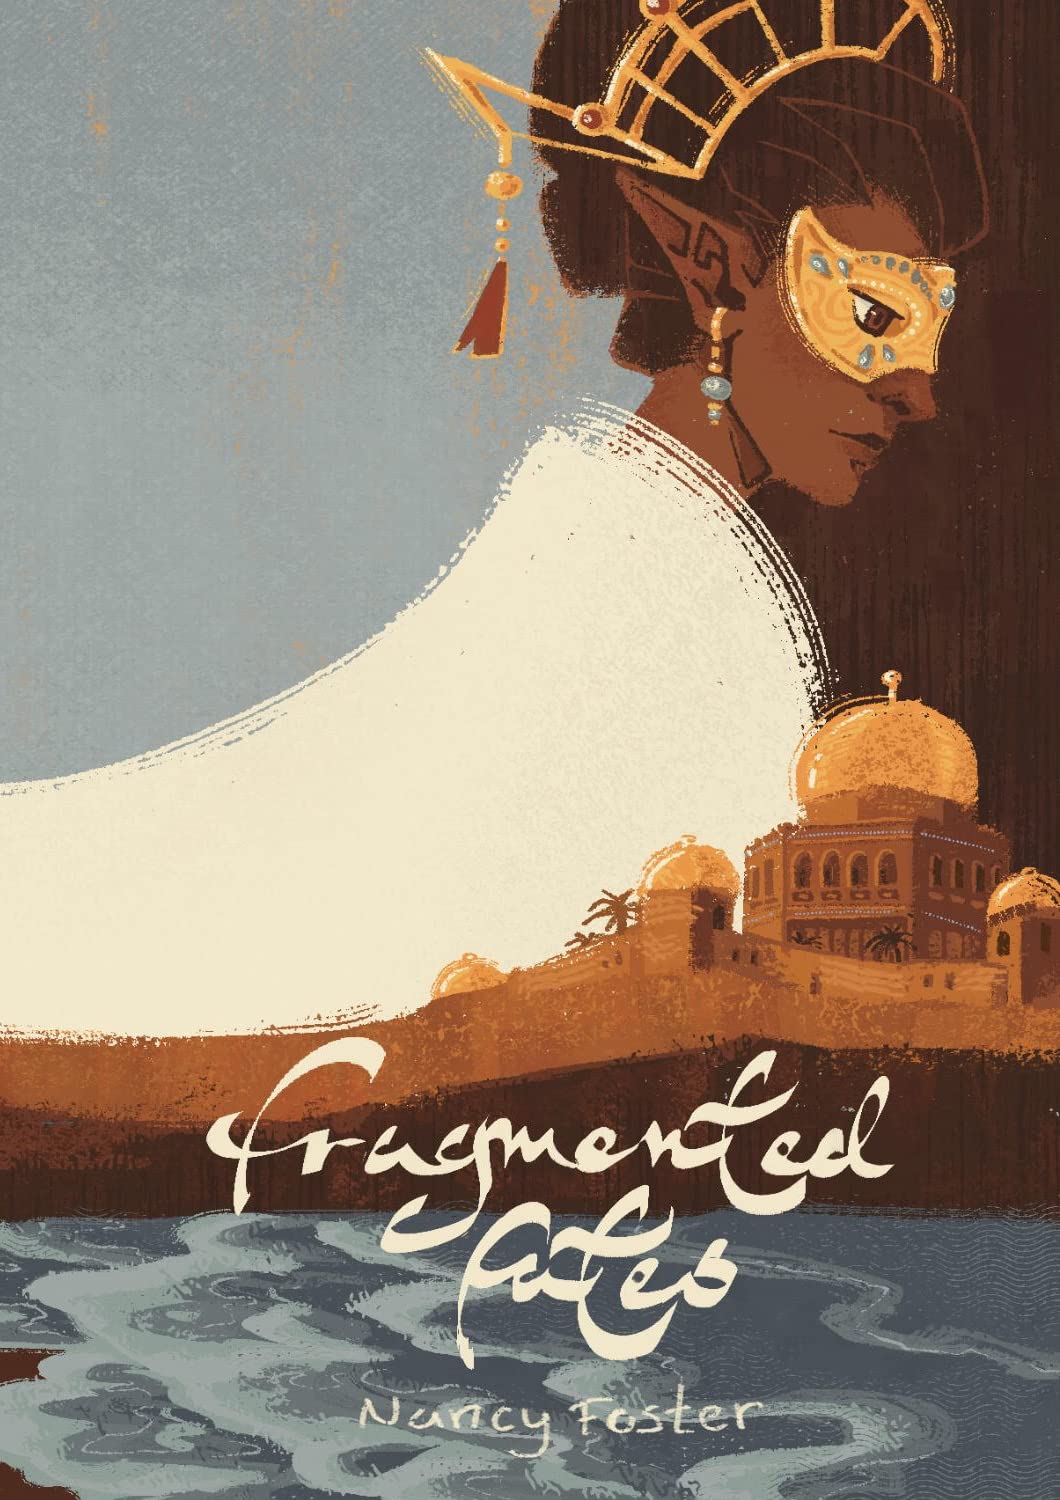 The cover of "Fragmented Fates", by Nancy Foster. Consists of an illustration with two distinct halves. The top half shows a halfling (the appearance is that of a human, but with pointed ears), with dark skin, and dark brown hair in an elaborate style adorned with a golden ornament resembling a tiara. She also wears a golden, jeweled mask, and a white mantle. The left side shows a cloudless blue sky, while the right side shows shadows. The bottom half displays a city in a desert, with a single large palace with a domed roof, and domed buildings along the walls. Beyond the city lies the ocean. The title is in white, at the very bottom, its font resembling arabic letters. The author's name sits beneath the title, in a smaller, different font, also white.